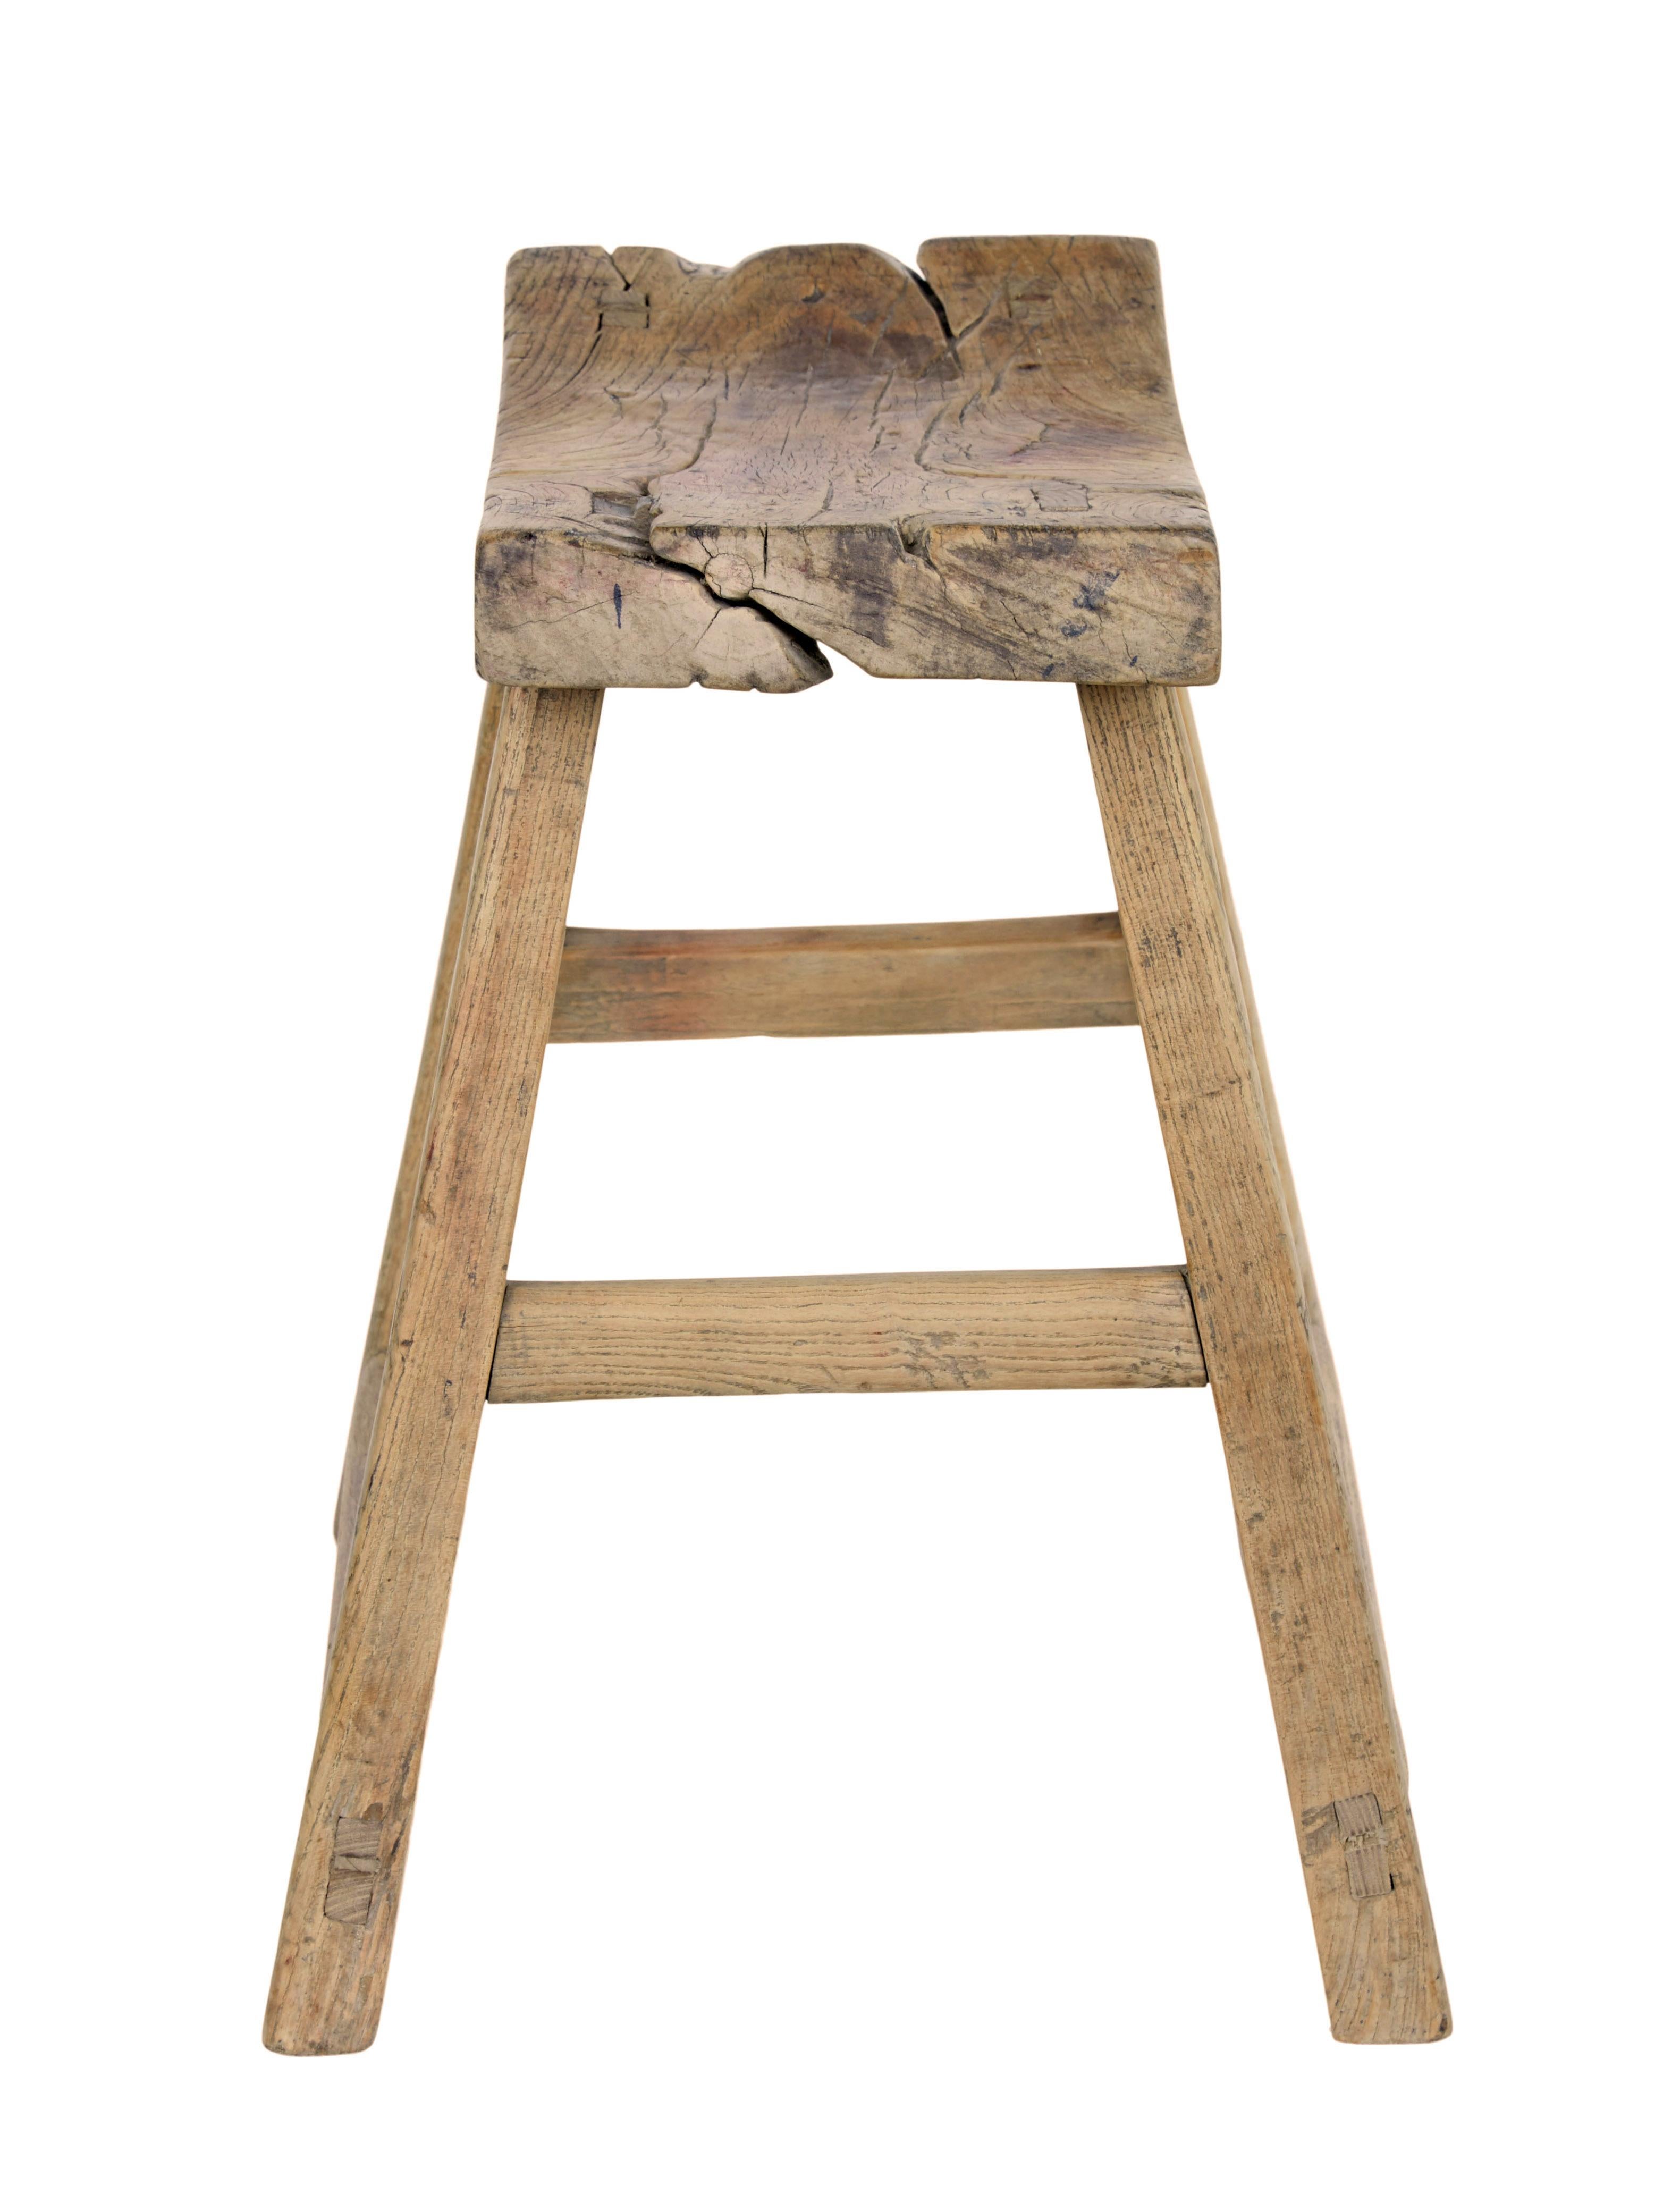 19th Century Rustic Chinese Hardwood Stool In Good Condition For Sale In Debenham, Suffolk